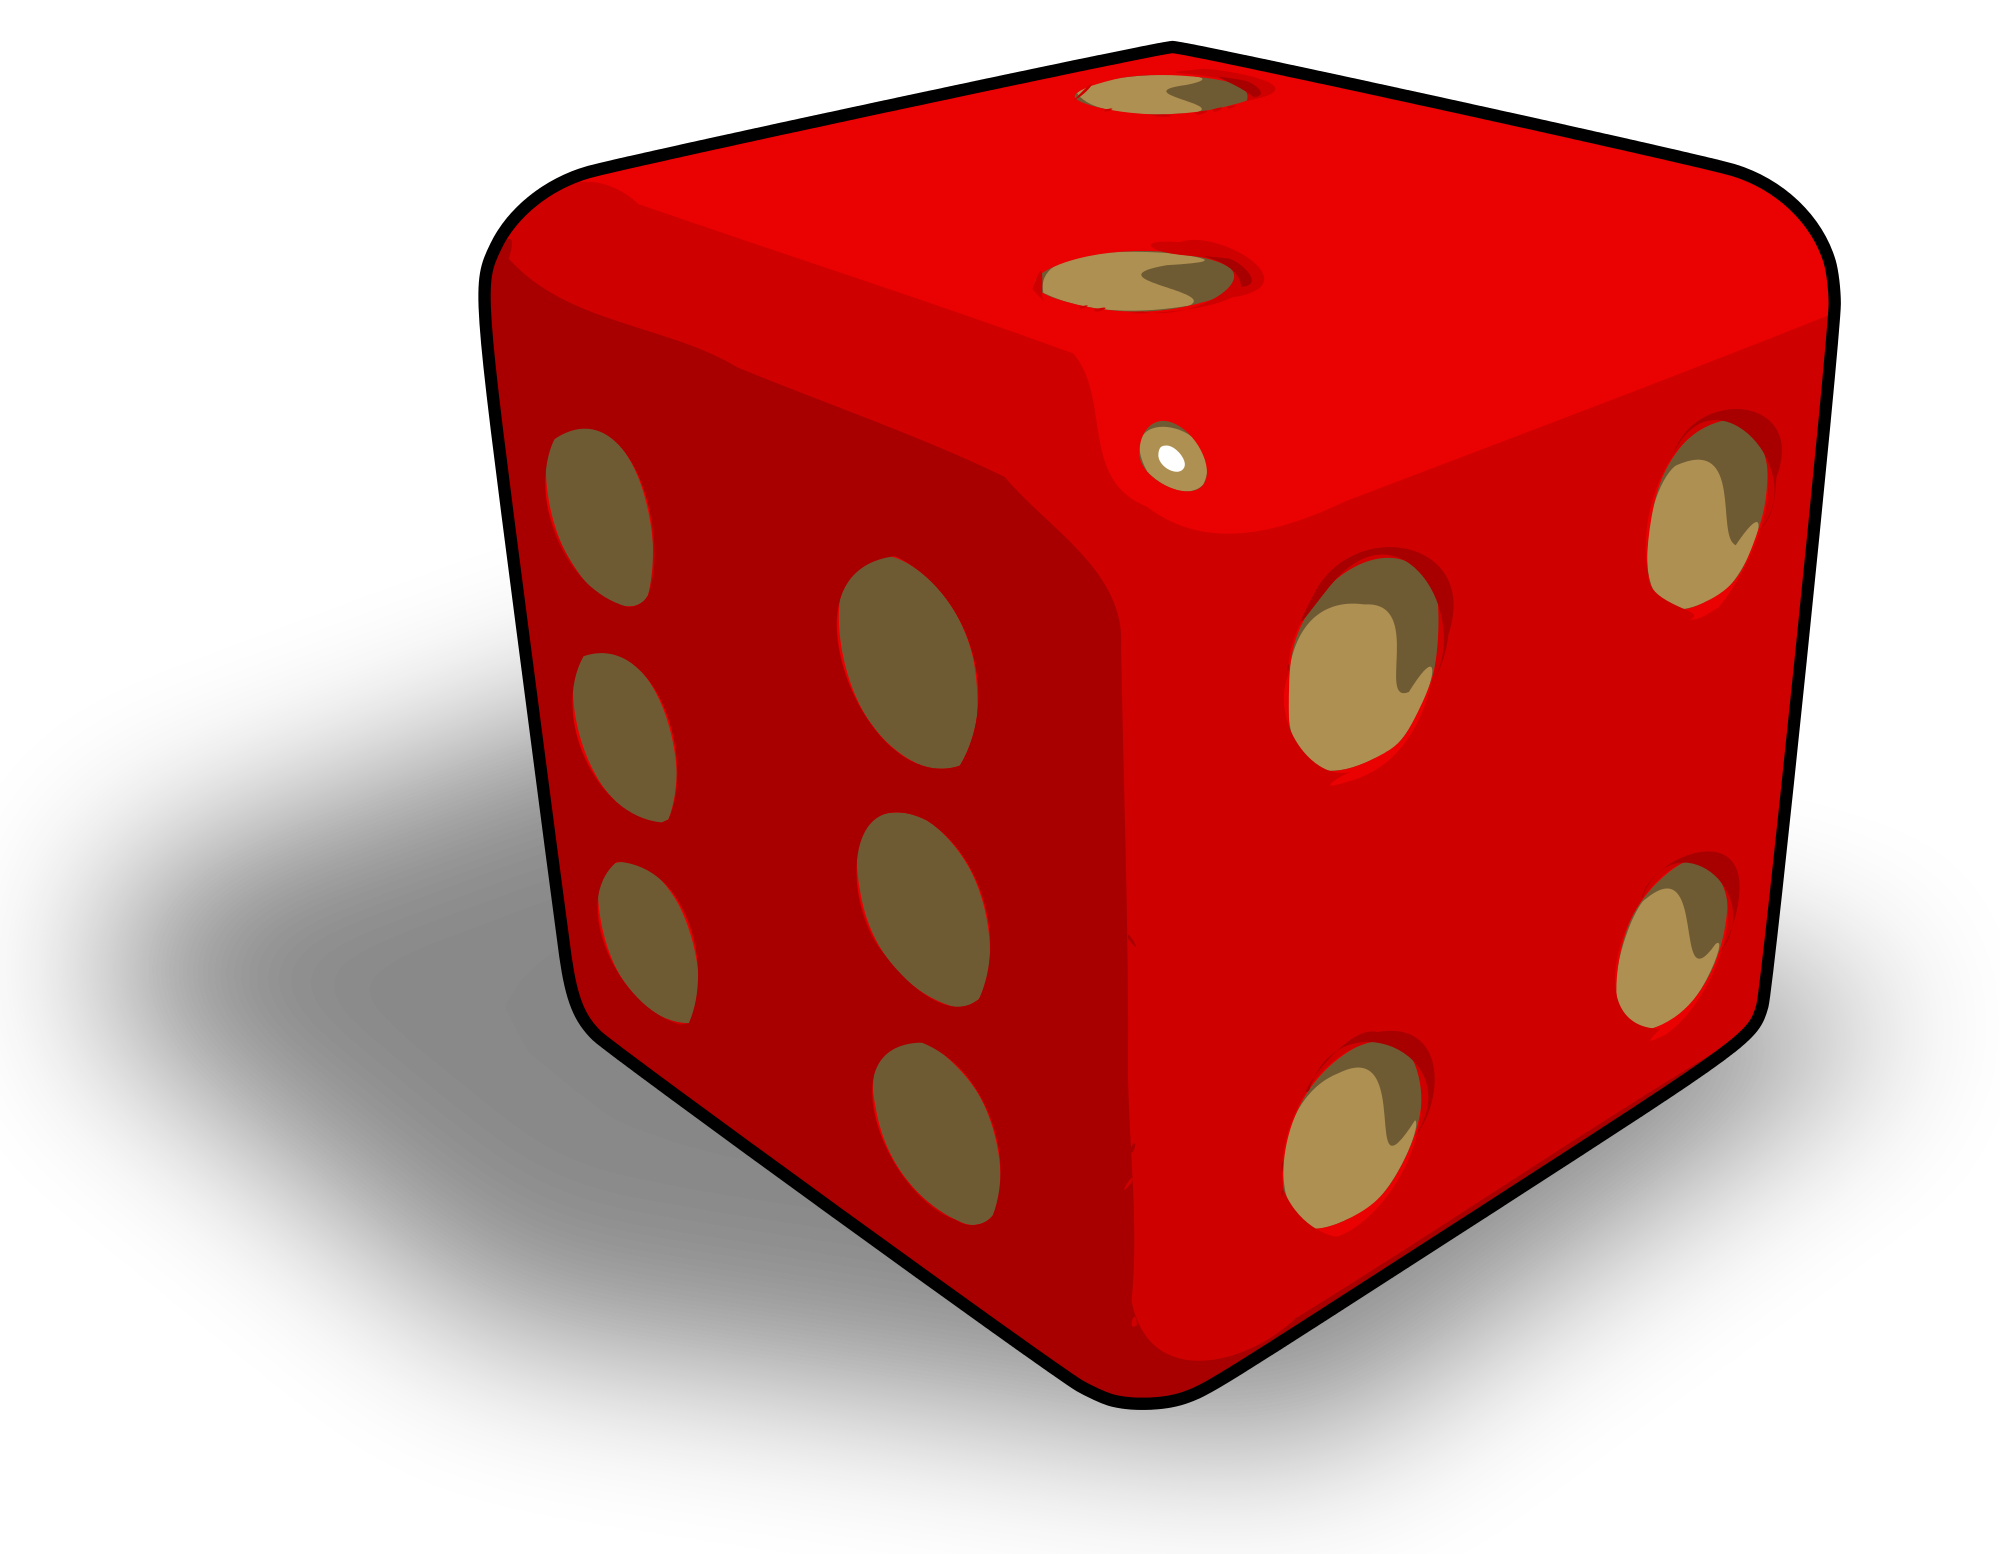 dice clipart red dice